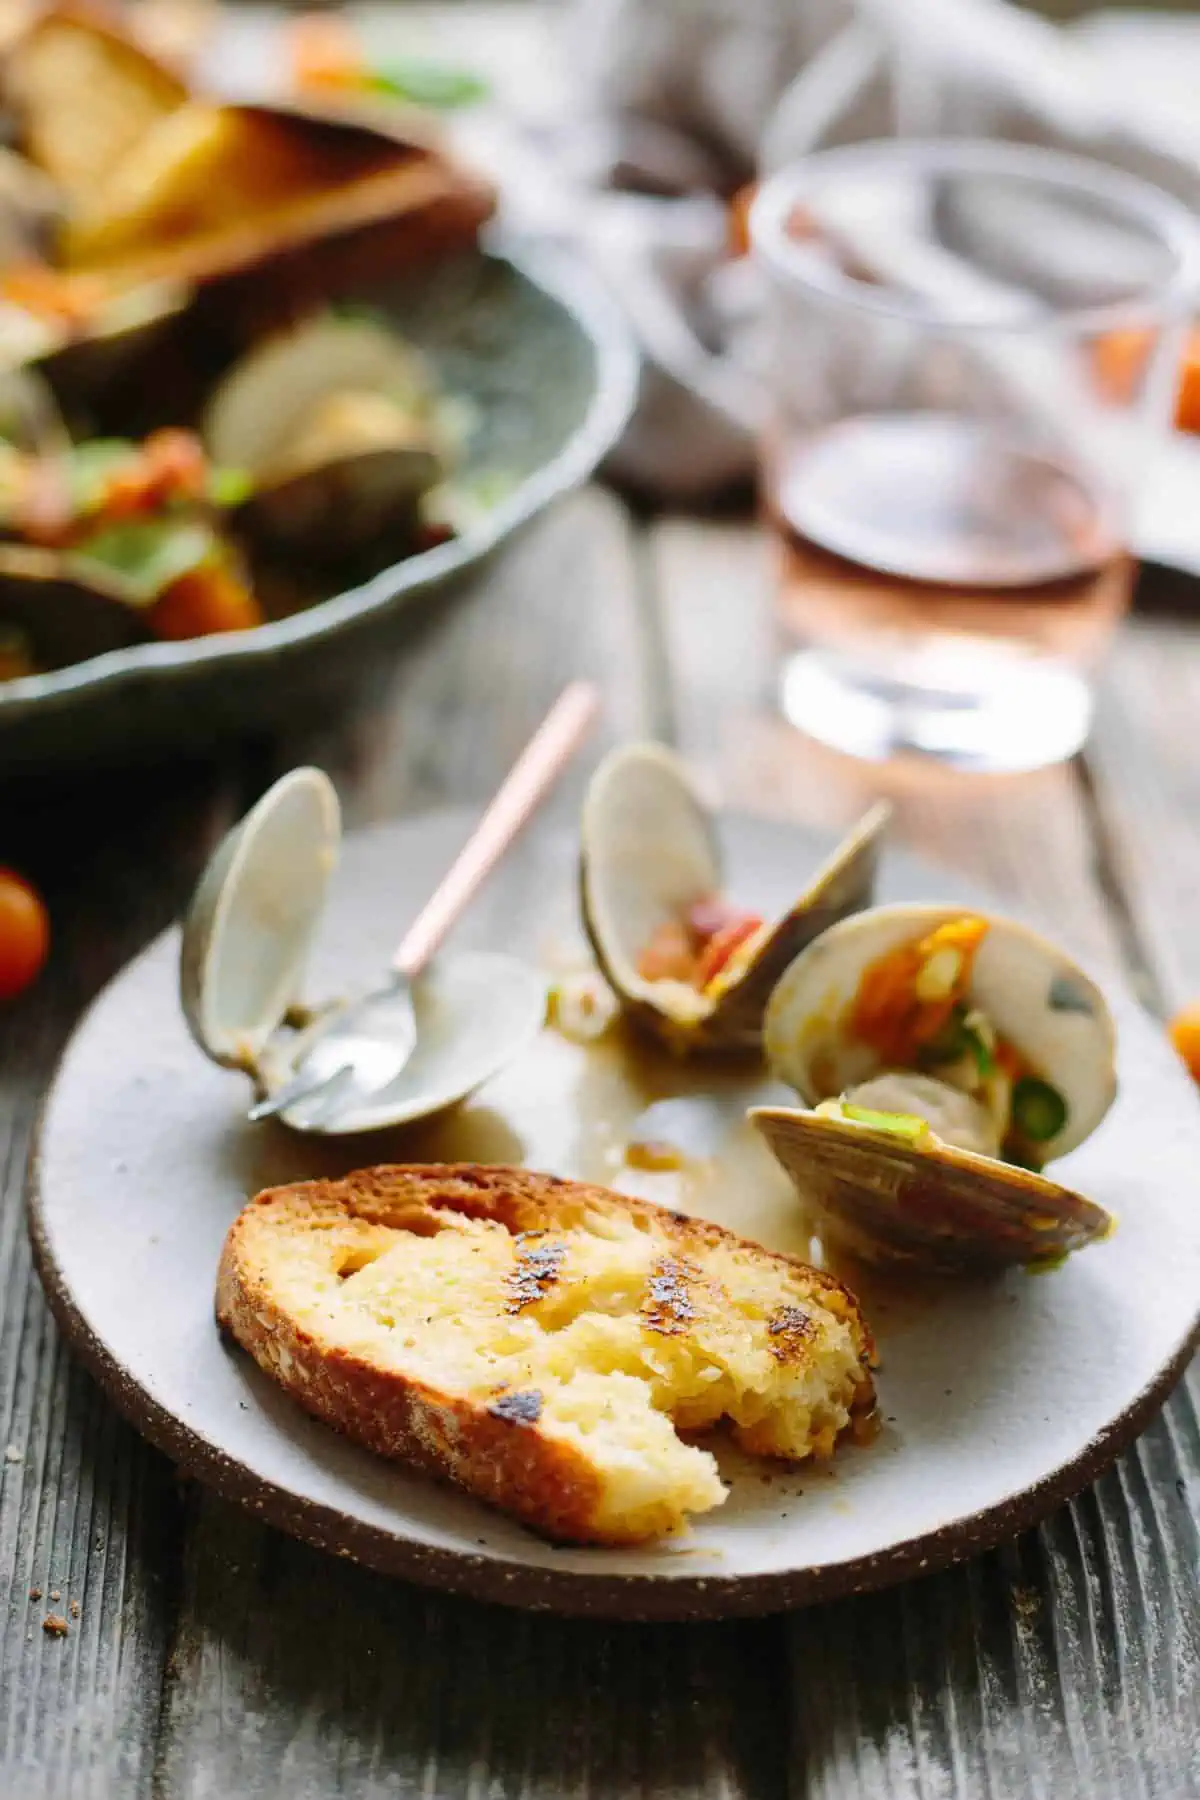 Toasted, buttered baguette and tomato topped clams on a white dinner plate.